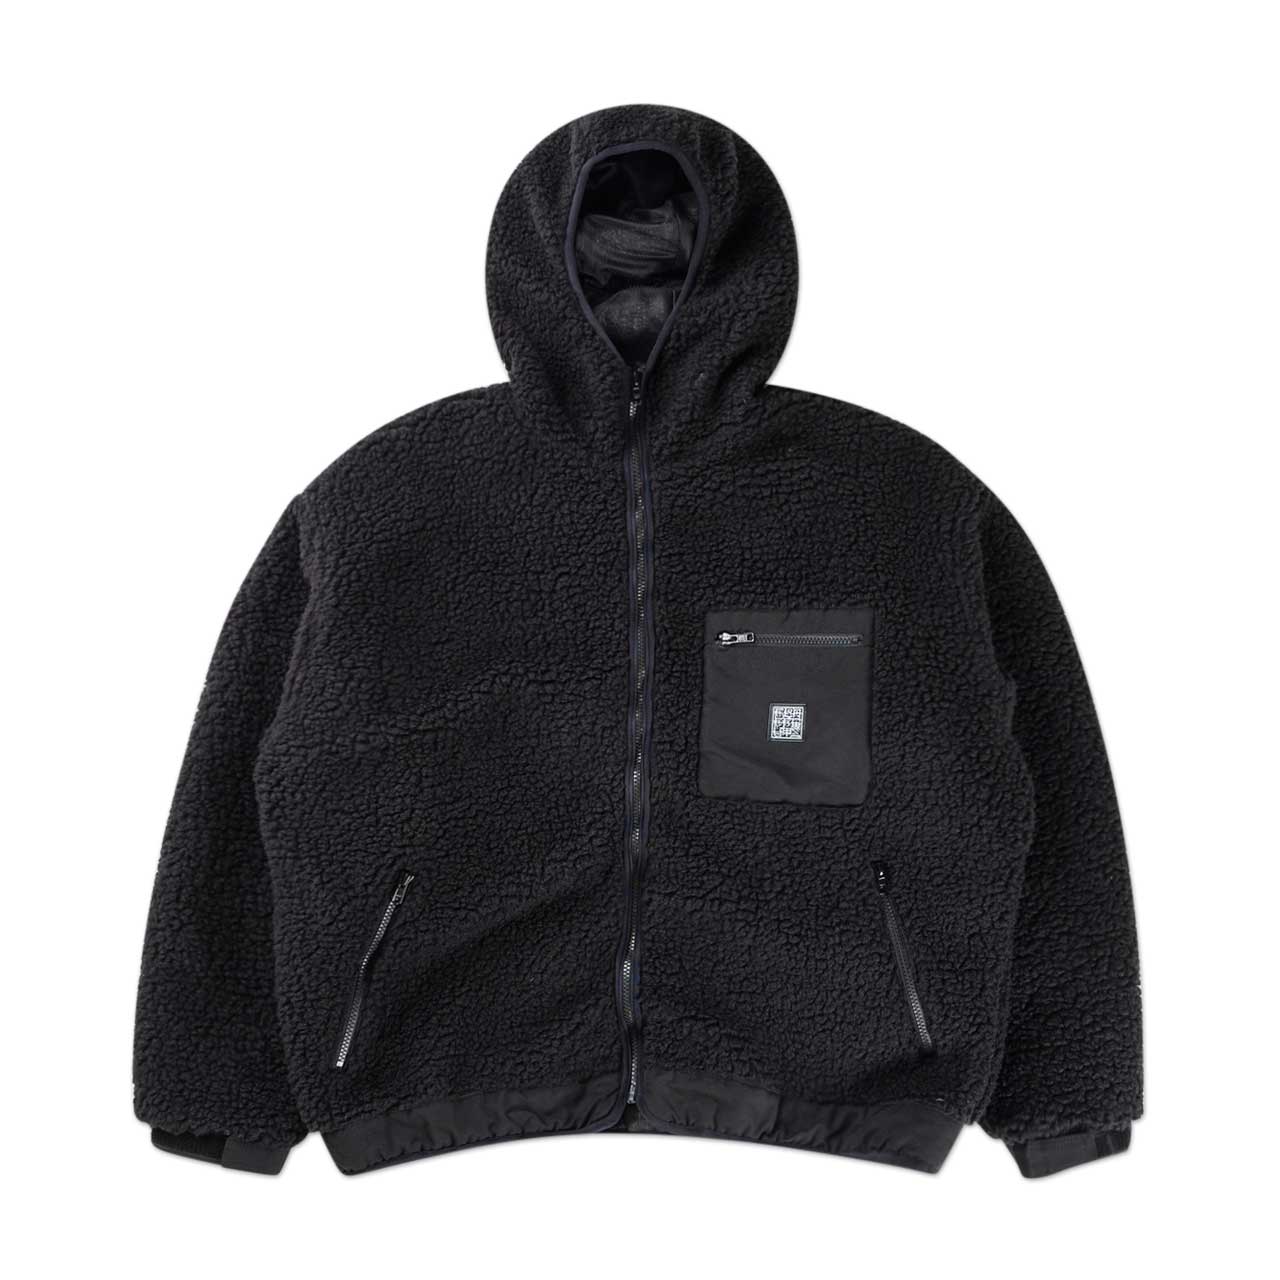 flagstuff f/z over hoodie jacket (black) 19AW- - a.plus